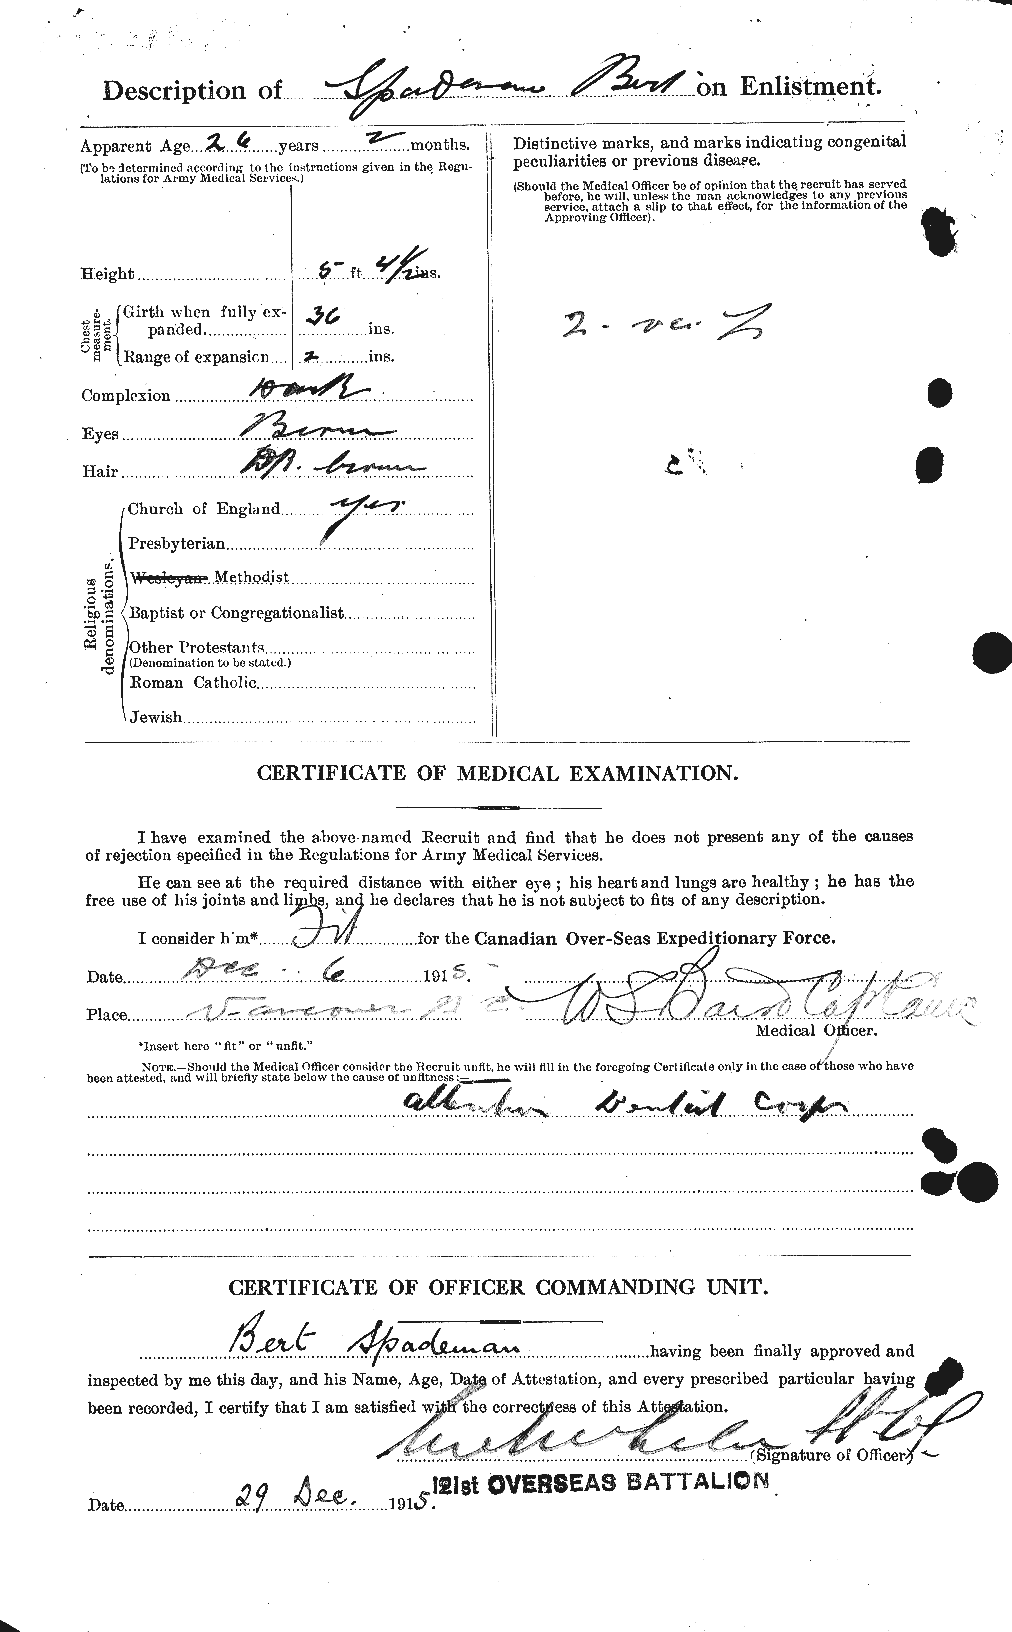 Personnel Records of the First World War - CEF 618280b